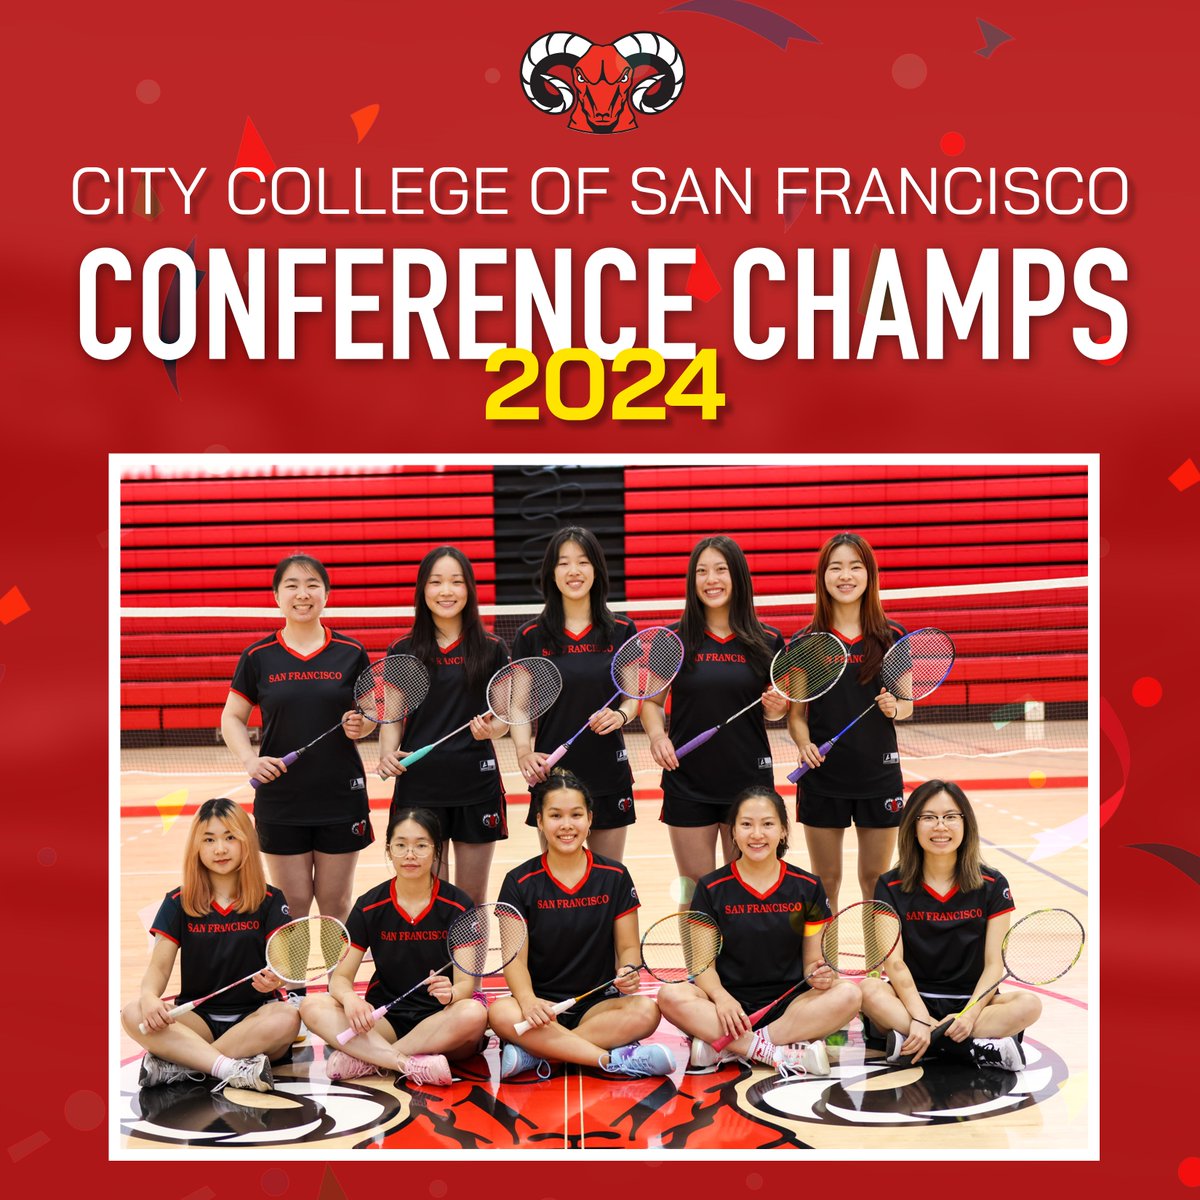 CCSF Badminton has won the Conference Championship on a 12-0 undefeated season! Congrats to our badminton superstars!